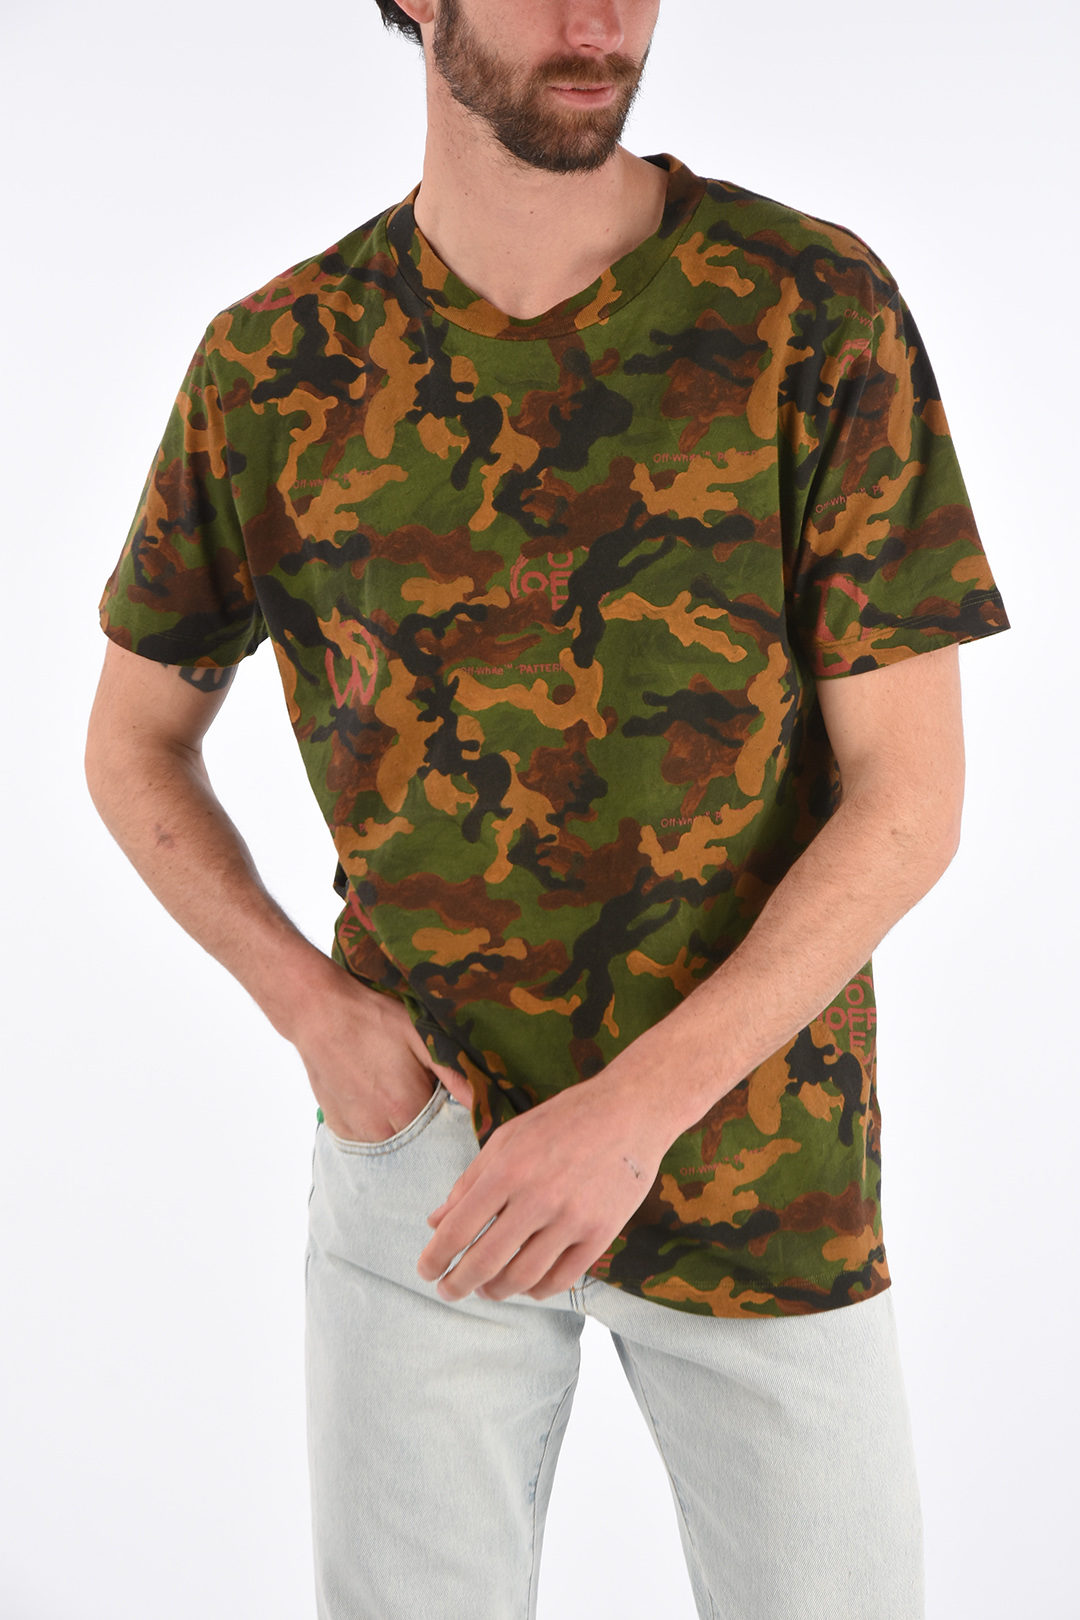 off white camouflage t shirt